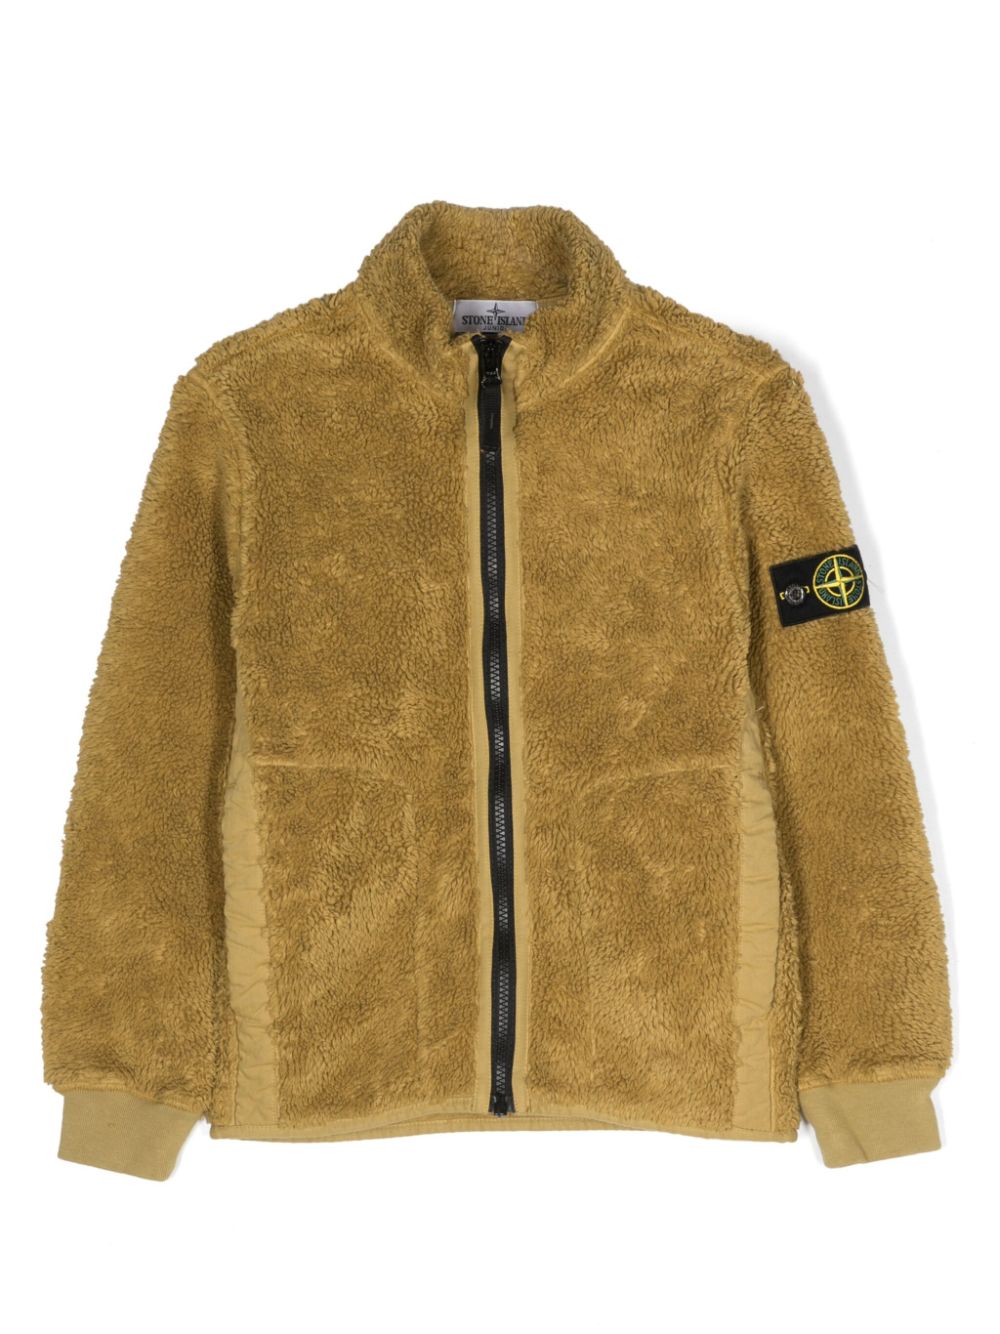 Green Compass-patch Sherpa jacket